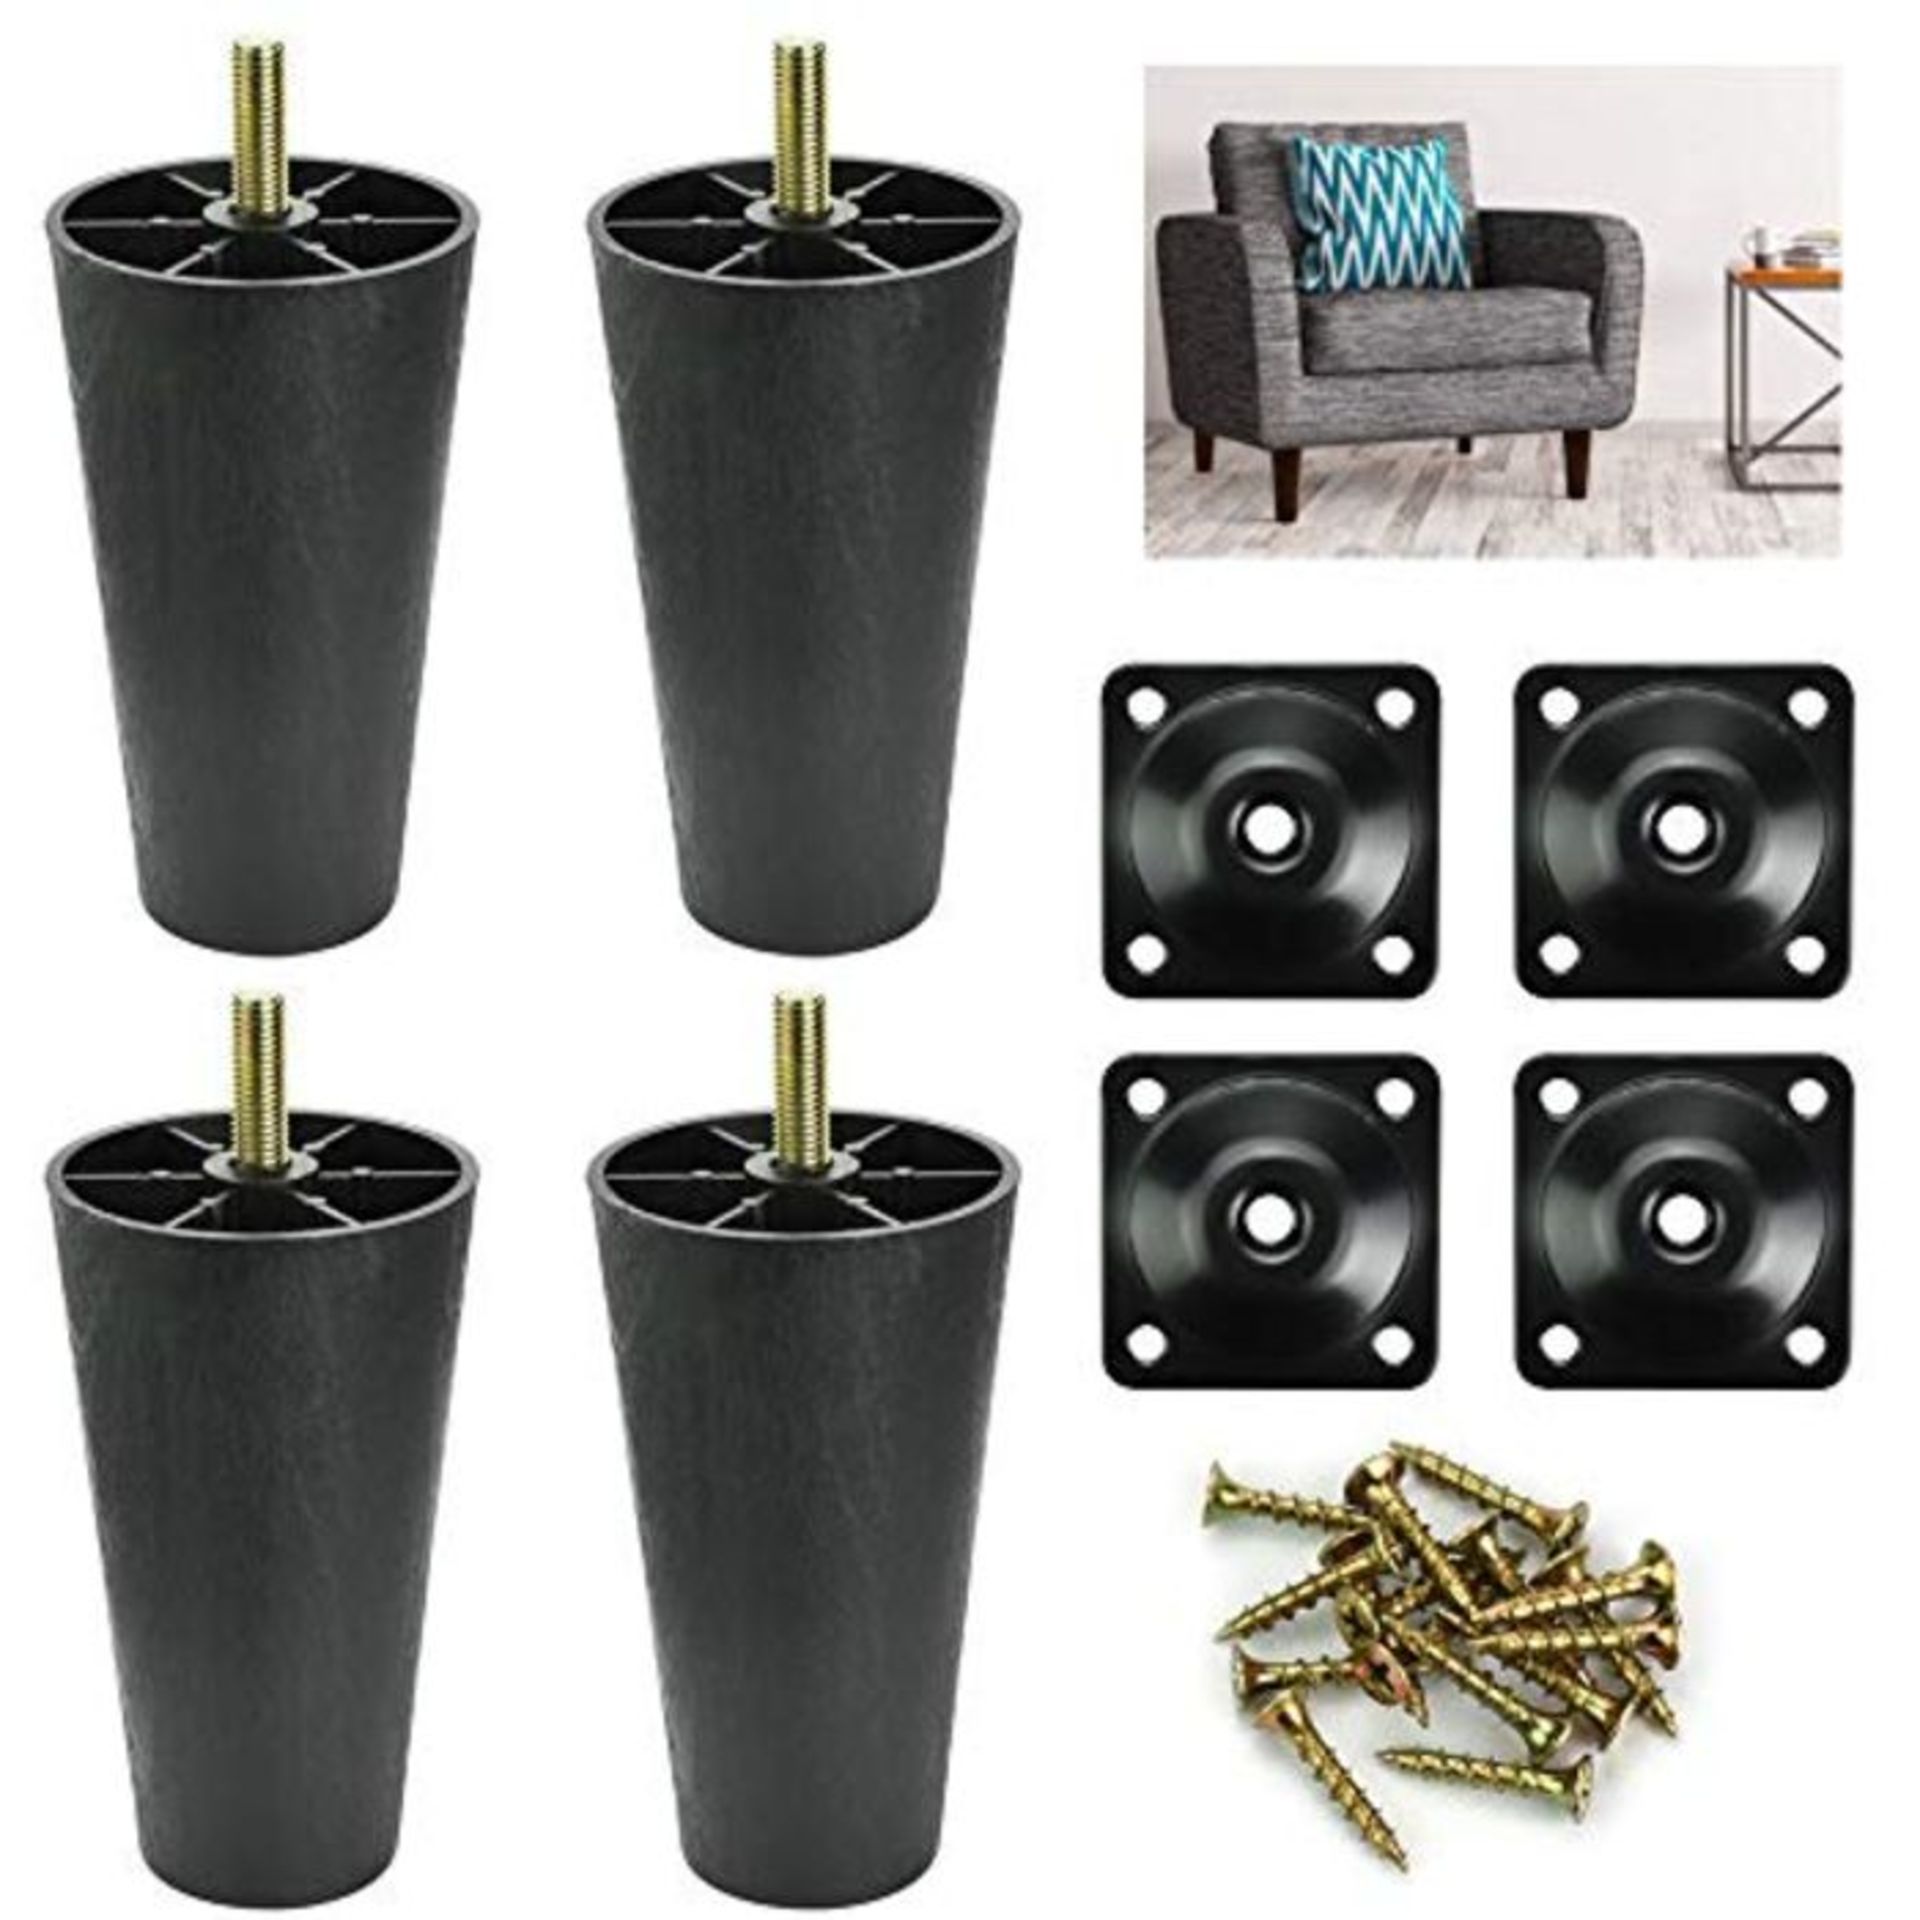 AFASOES 4pcs Sofa Legs Plastic Sofa Couch Feet Universal Chair Bed Legs Black Tapered